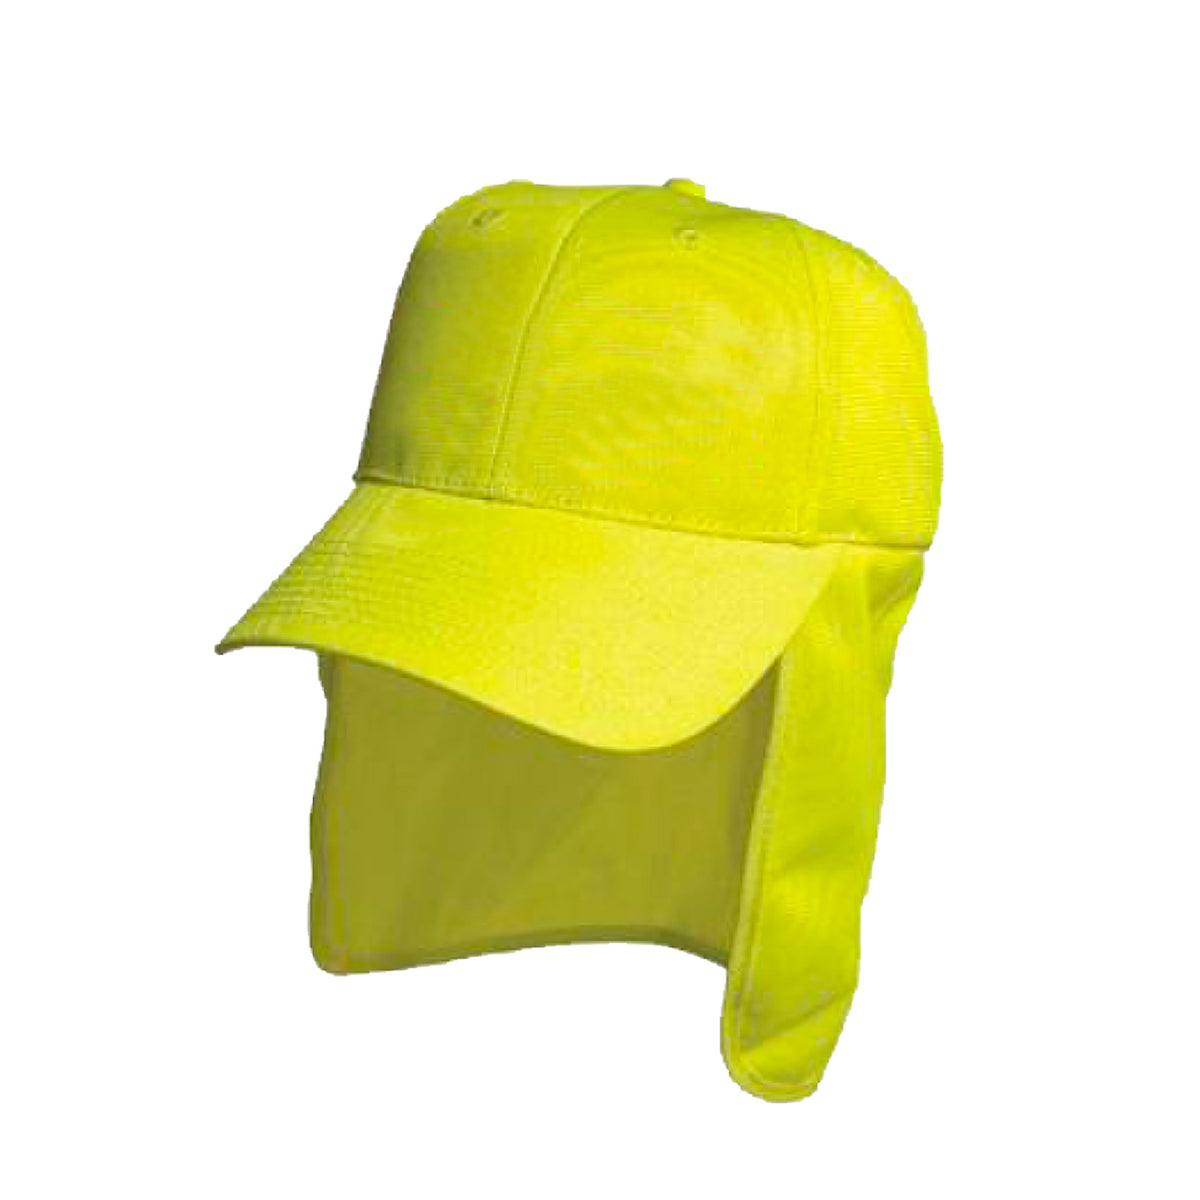 green luminescent safety cap with flap